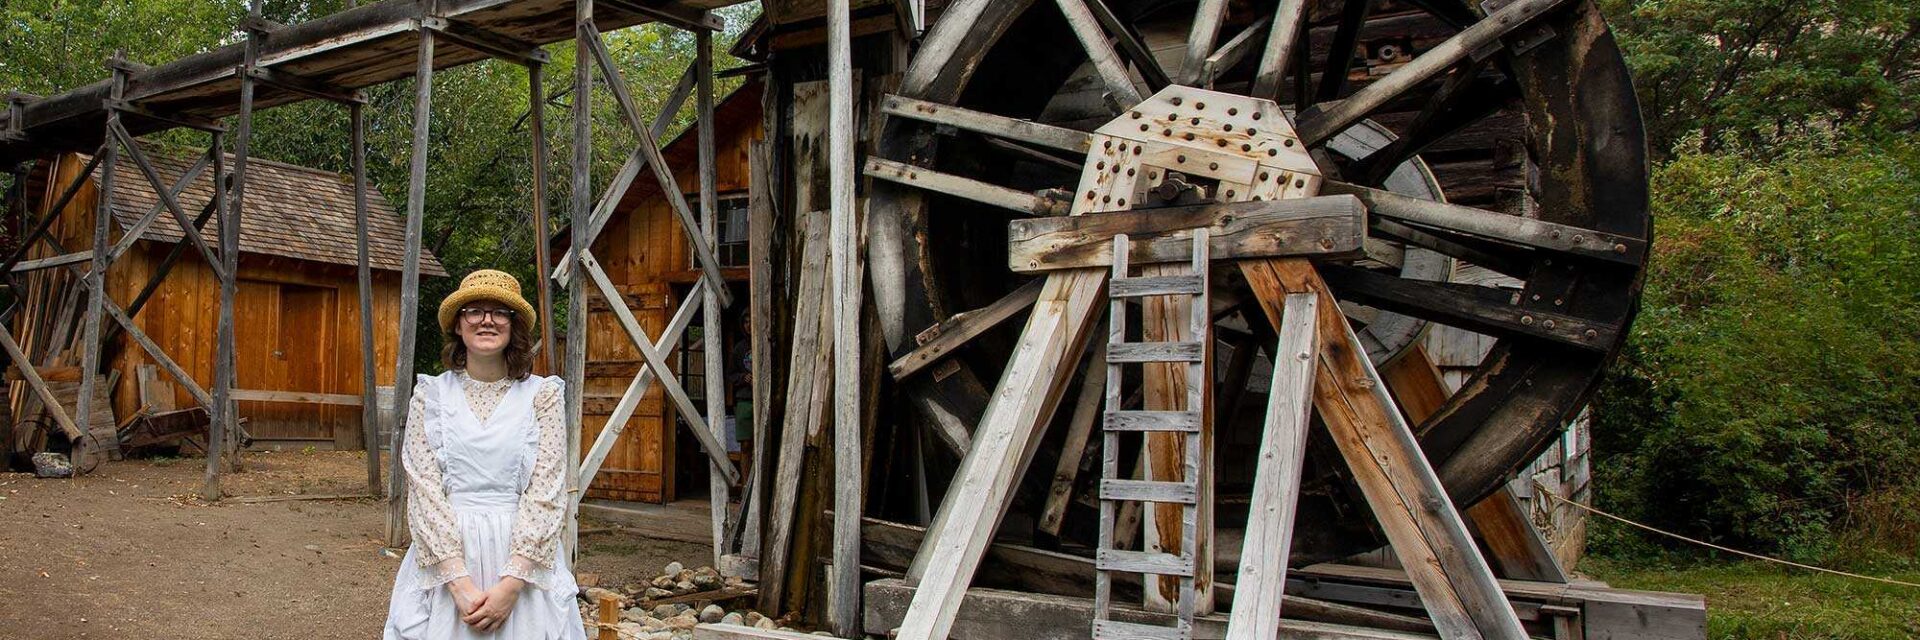 Authentic recreation at Grist Mill